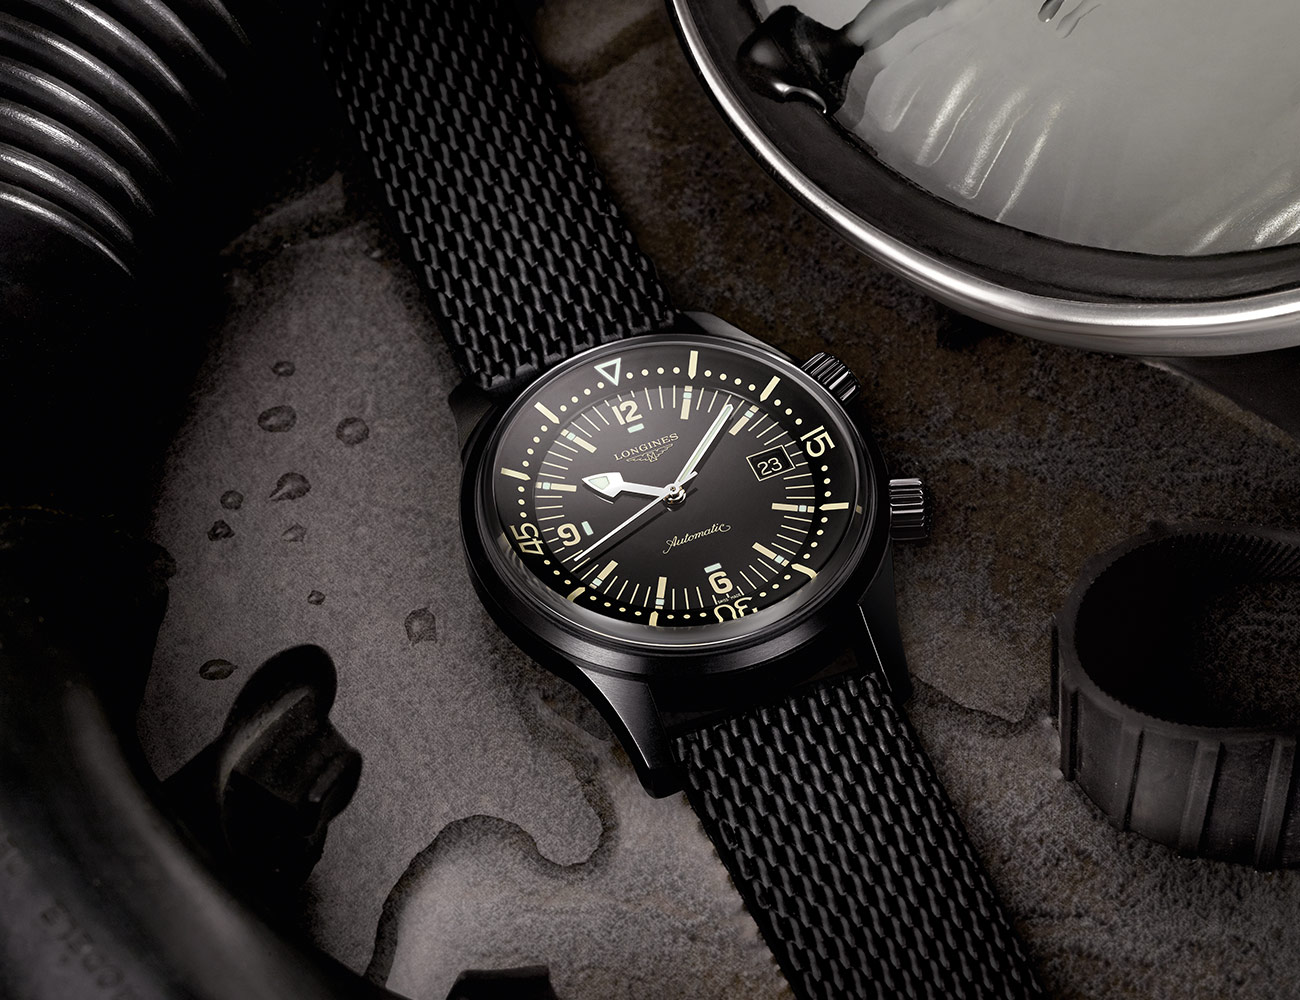 Baselworld 2018: Longines’ Vintage Dive Watch Looks Magnificent in All Black